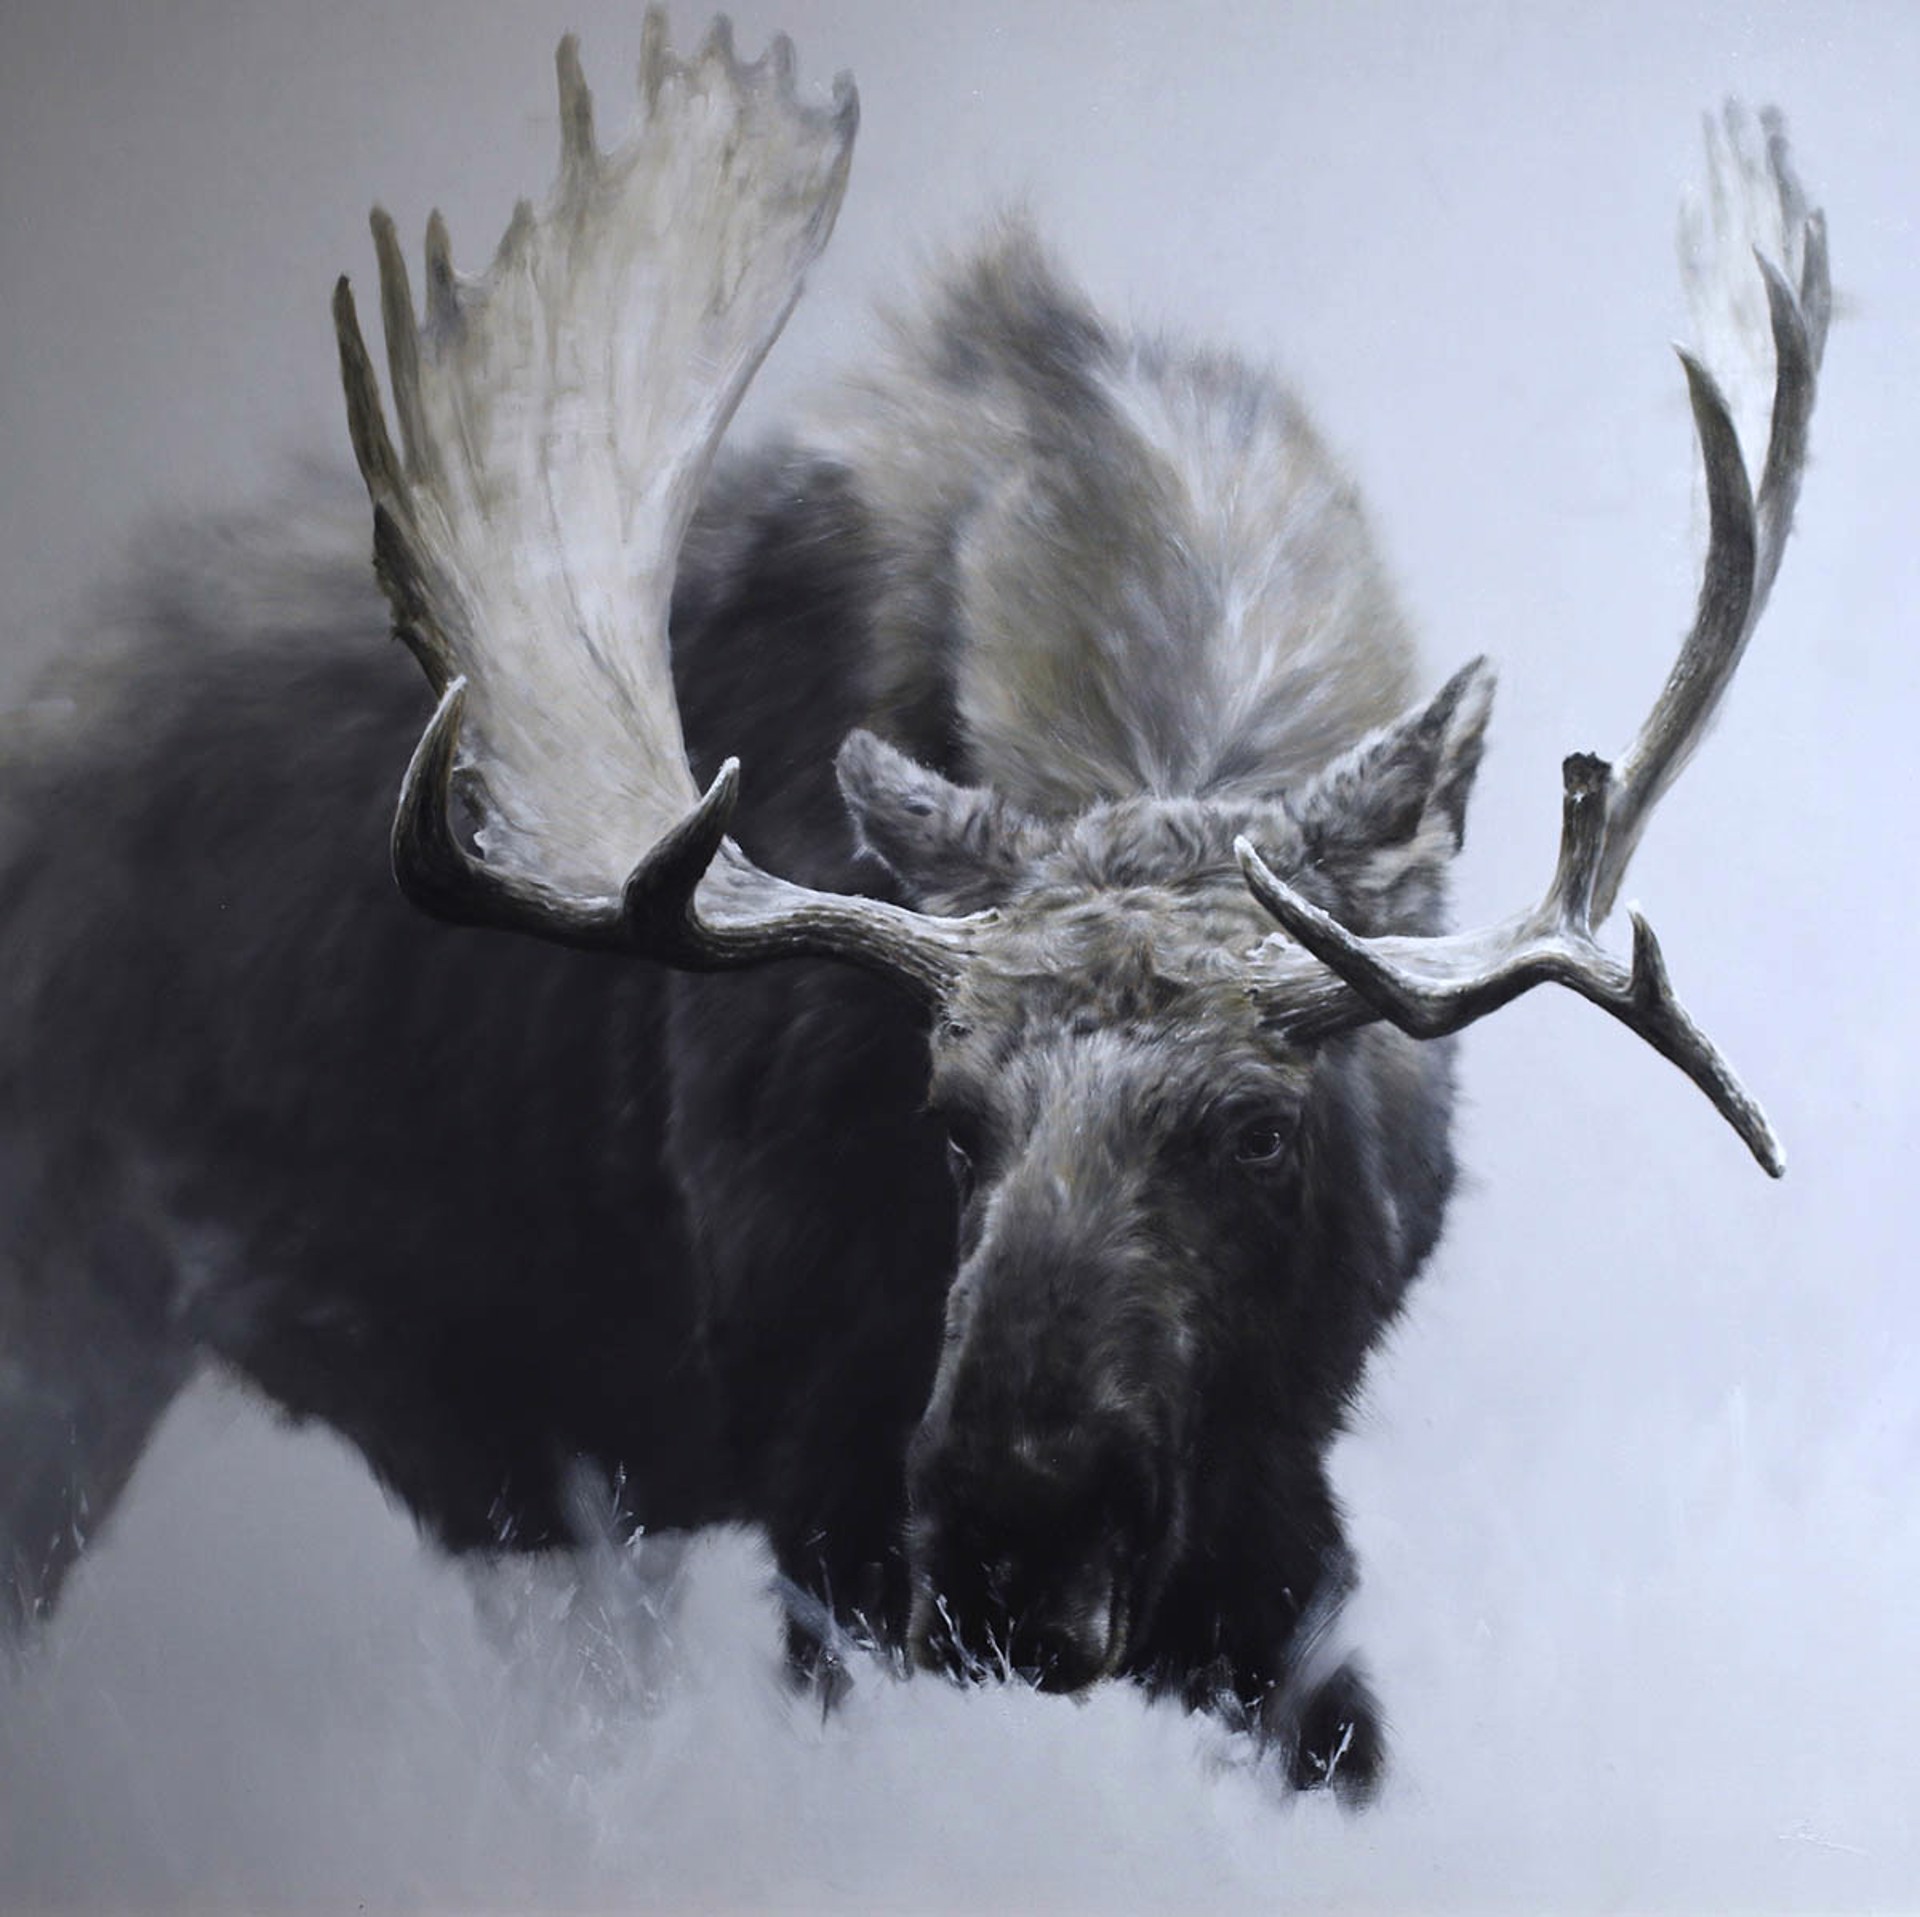 Original Oil Painting By Doyle Hostetler Featuring A Bull Moose In Muted Color Scheme